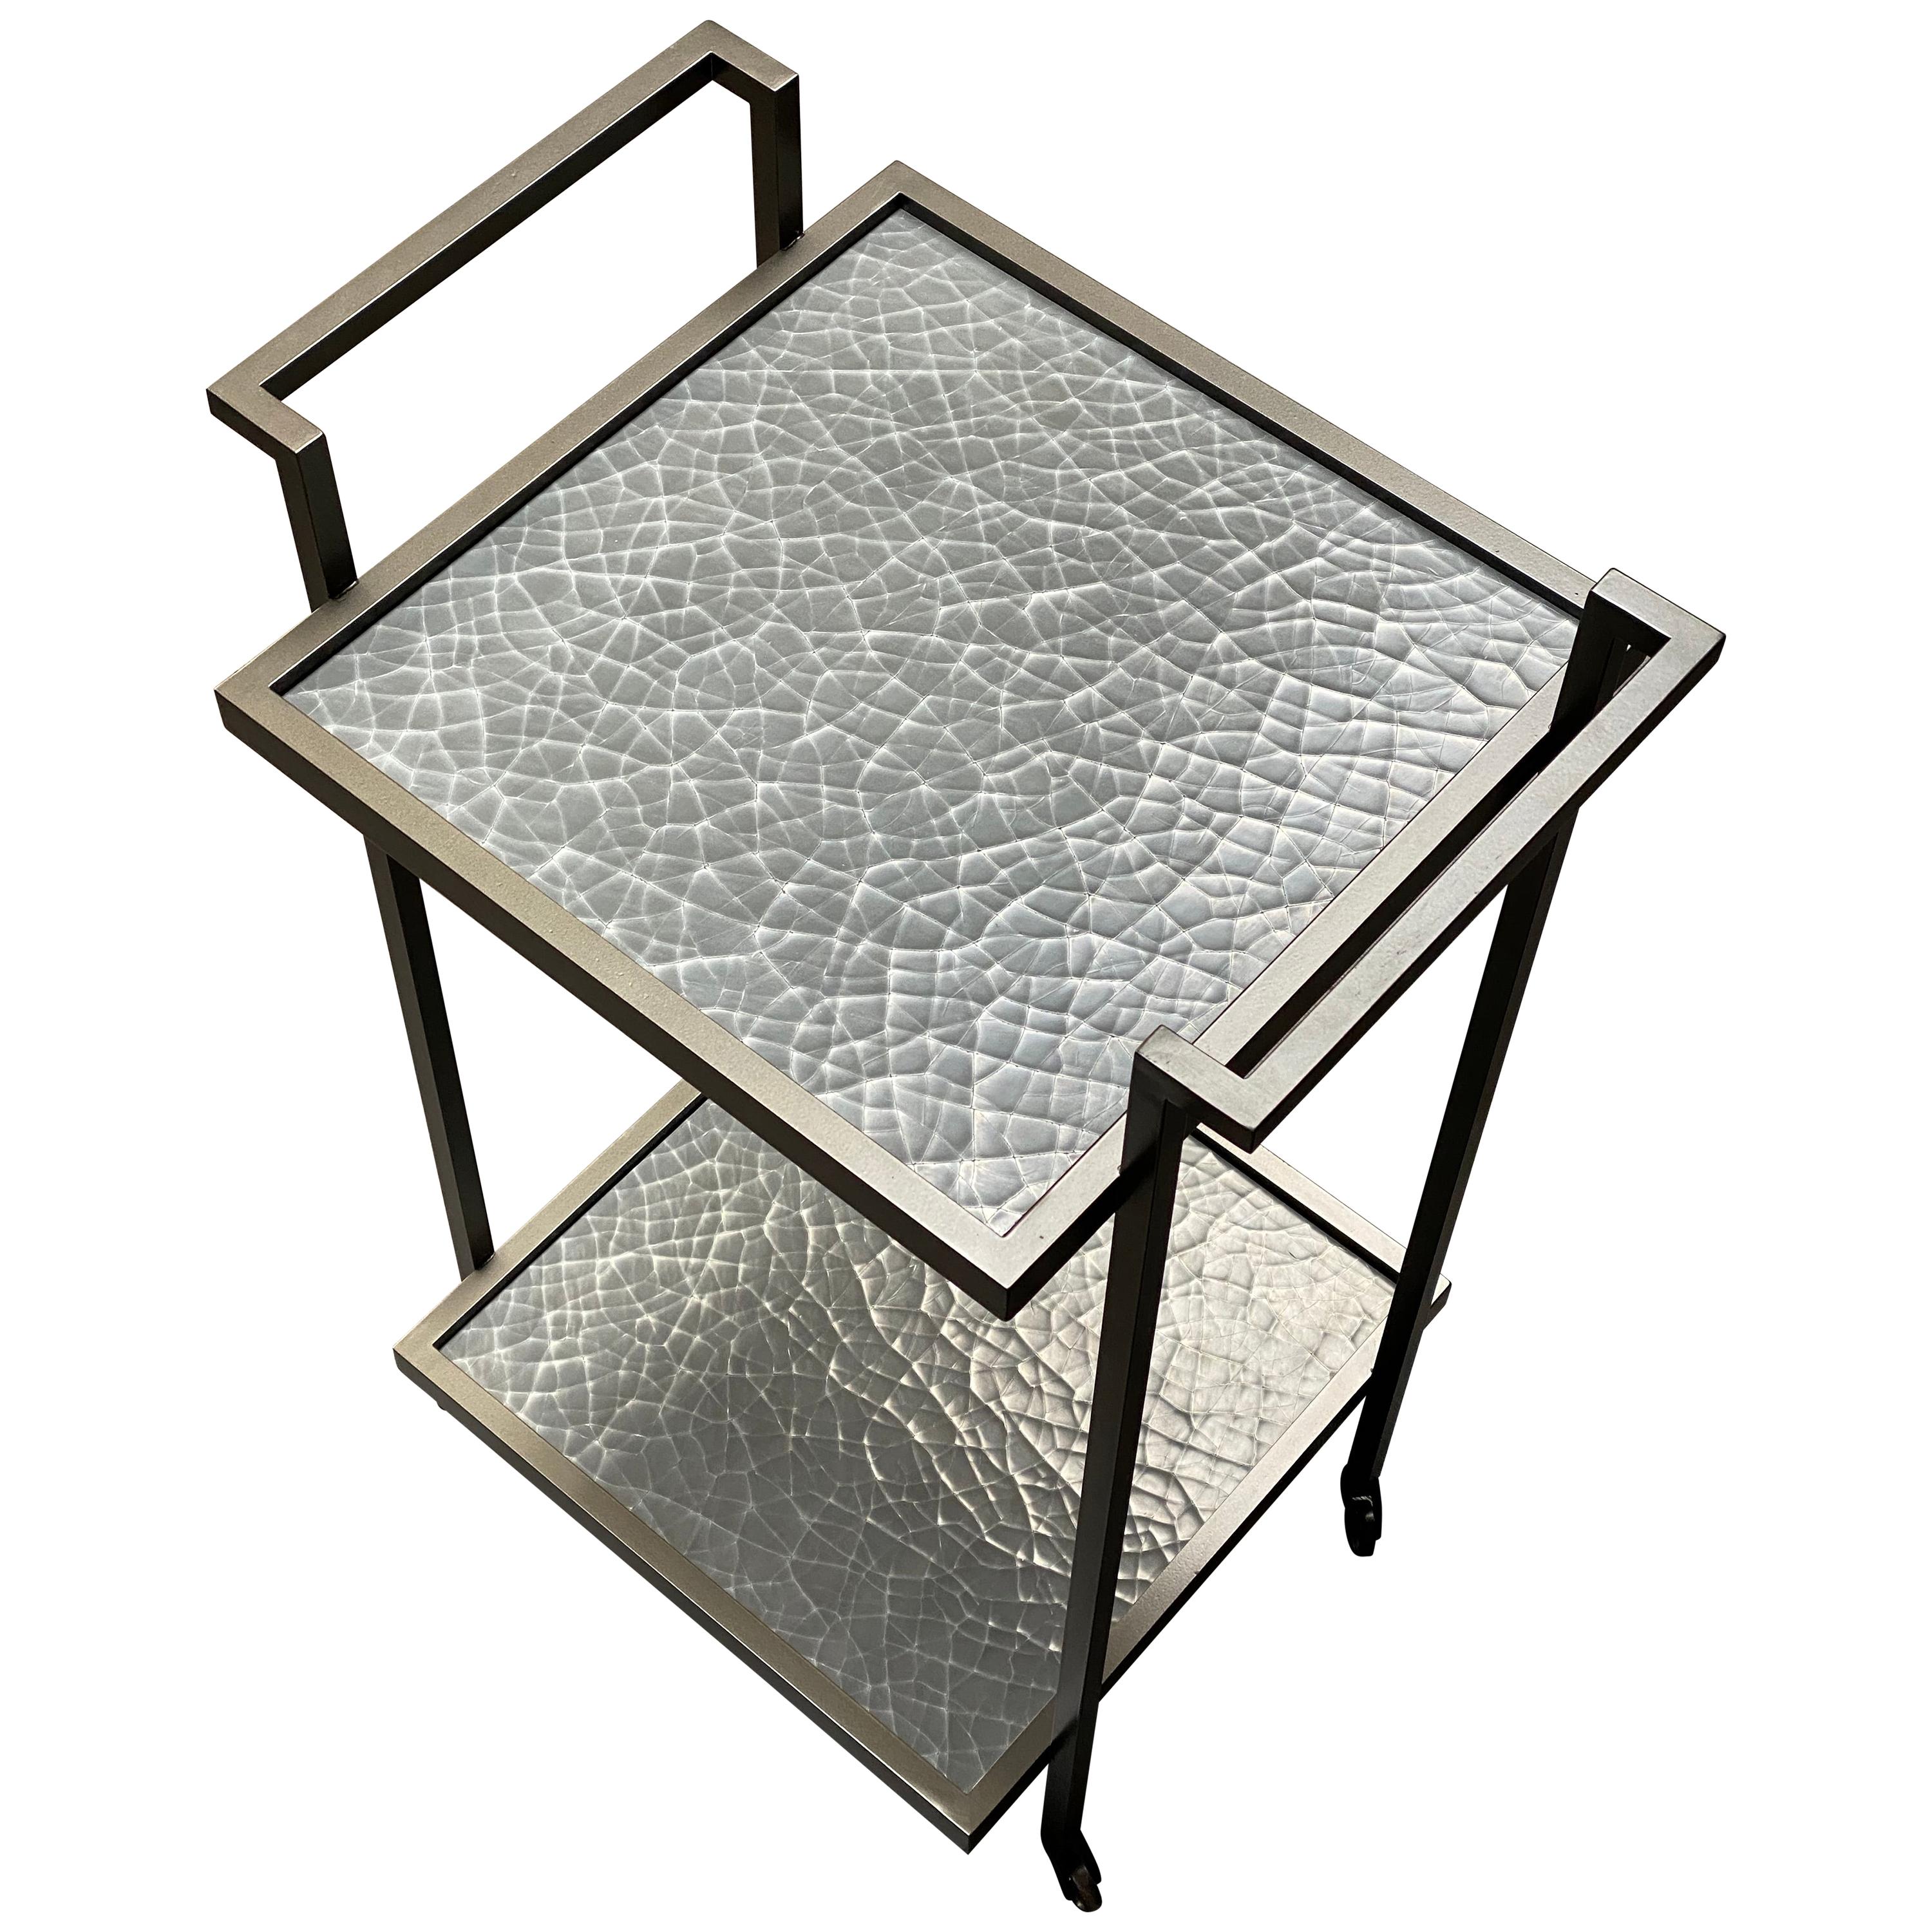 Art Deco Bacco Drinks Trolley in Dark Bronze and Silver Cracked Gesso